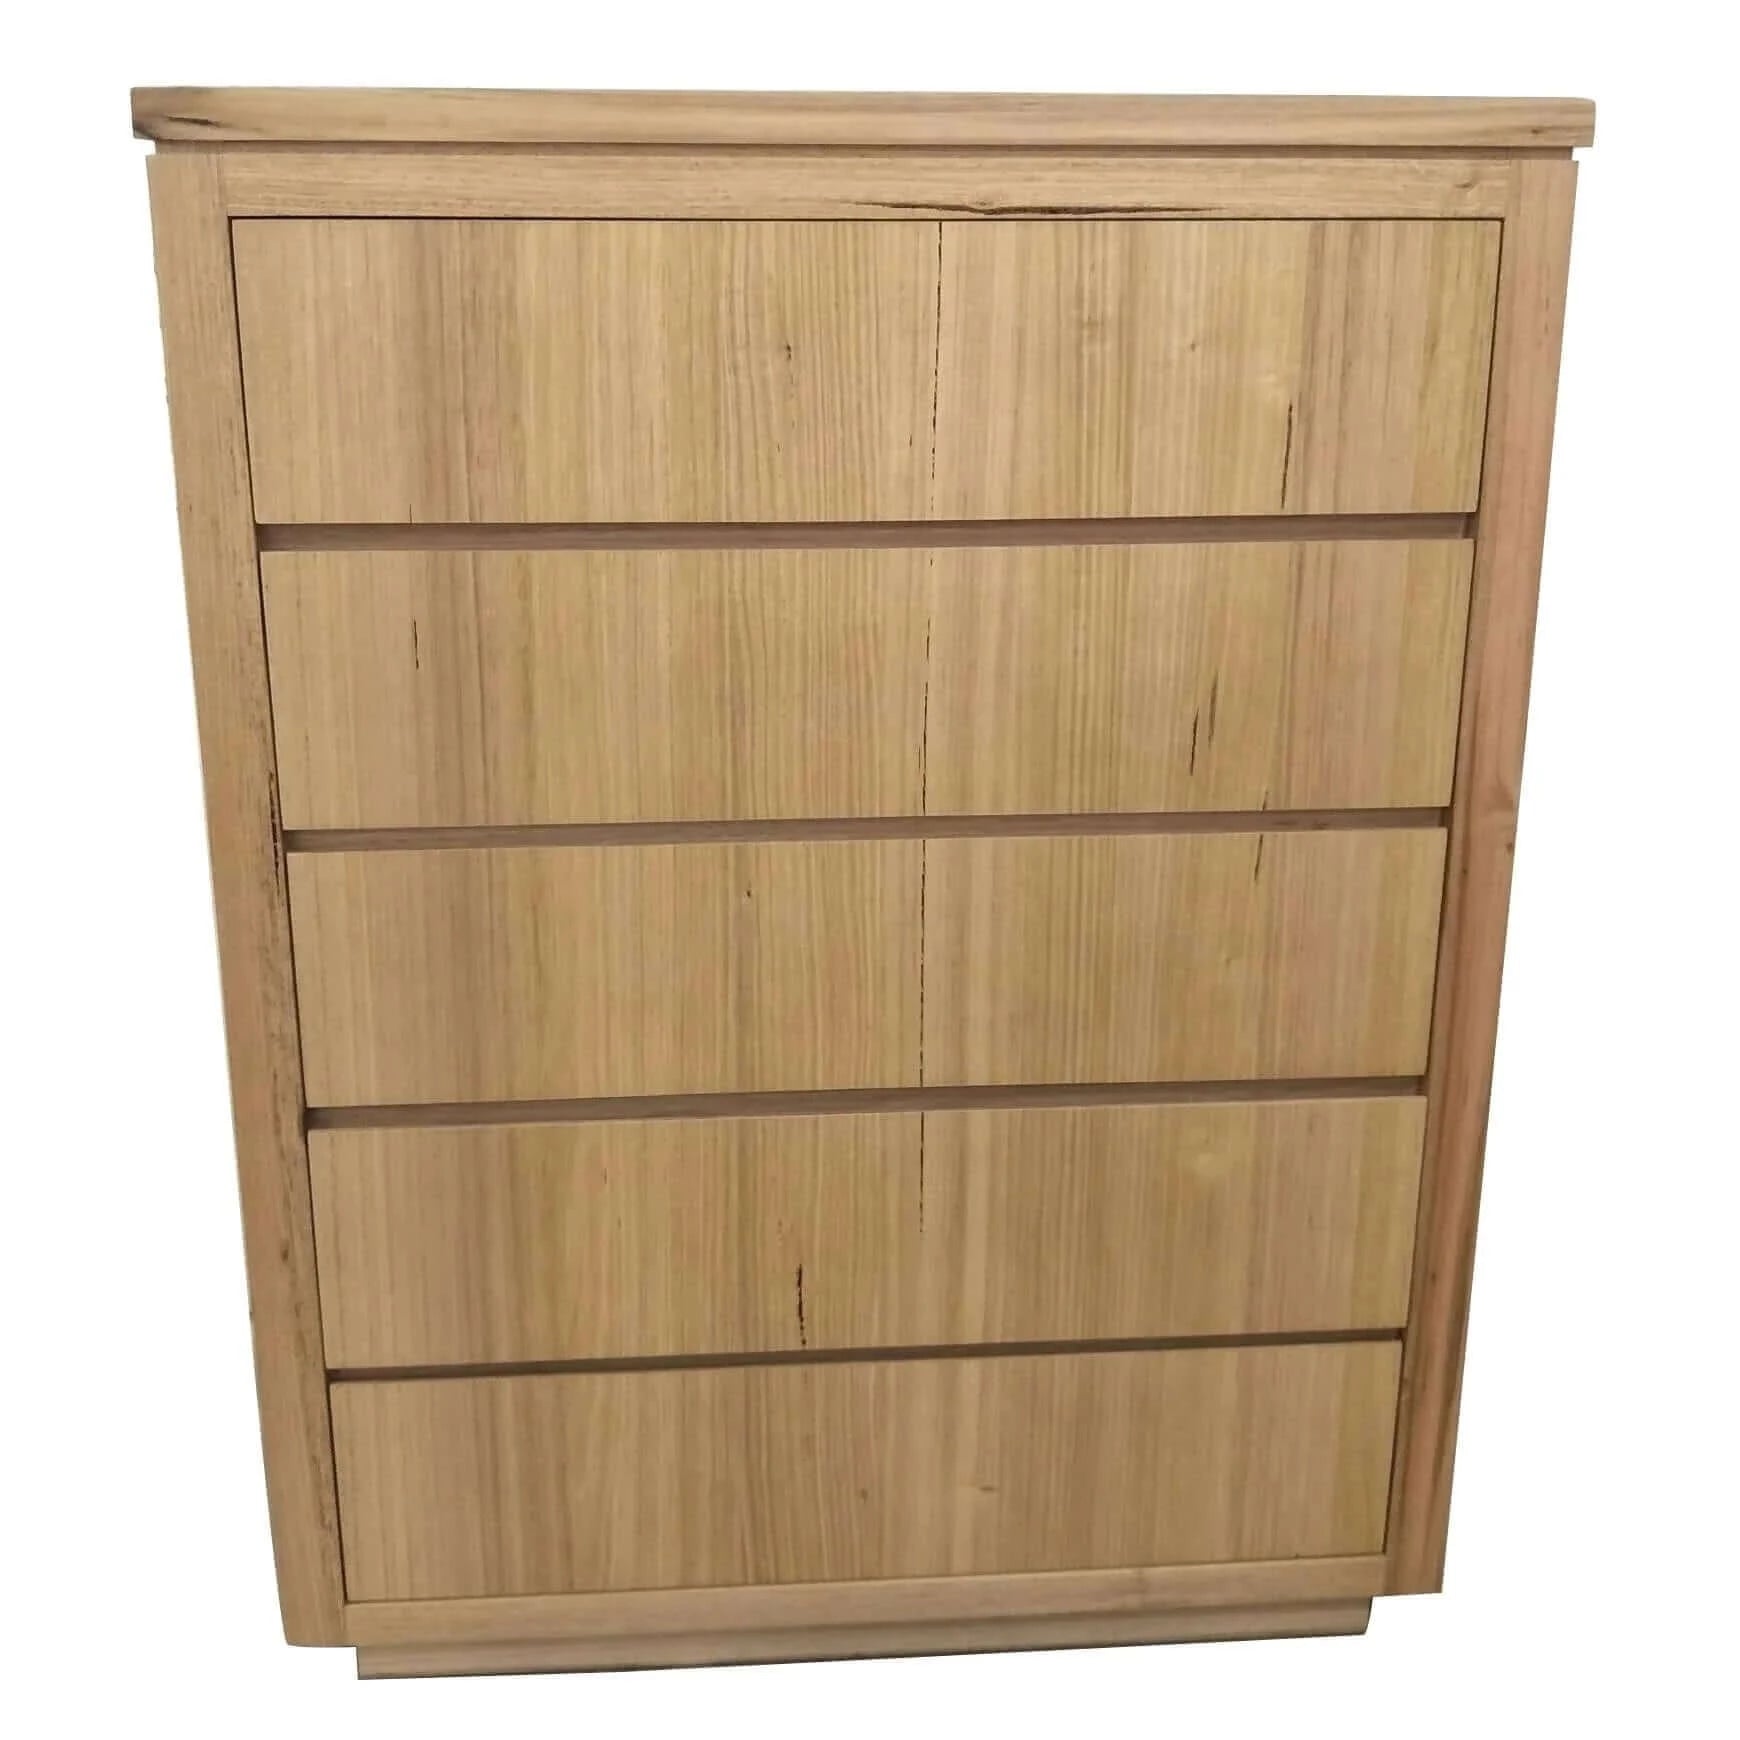 Buy rosemallow tallboy 5 chest of drawers solid messmate wood bed storage cabinet - upinteriors-Upinteriors